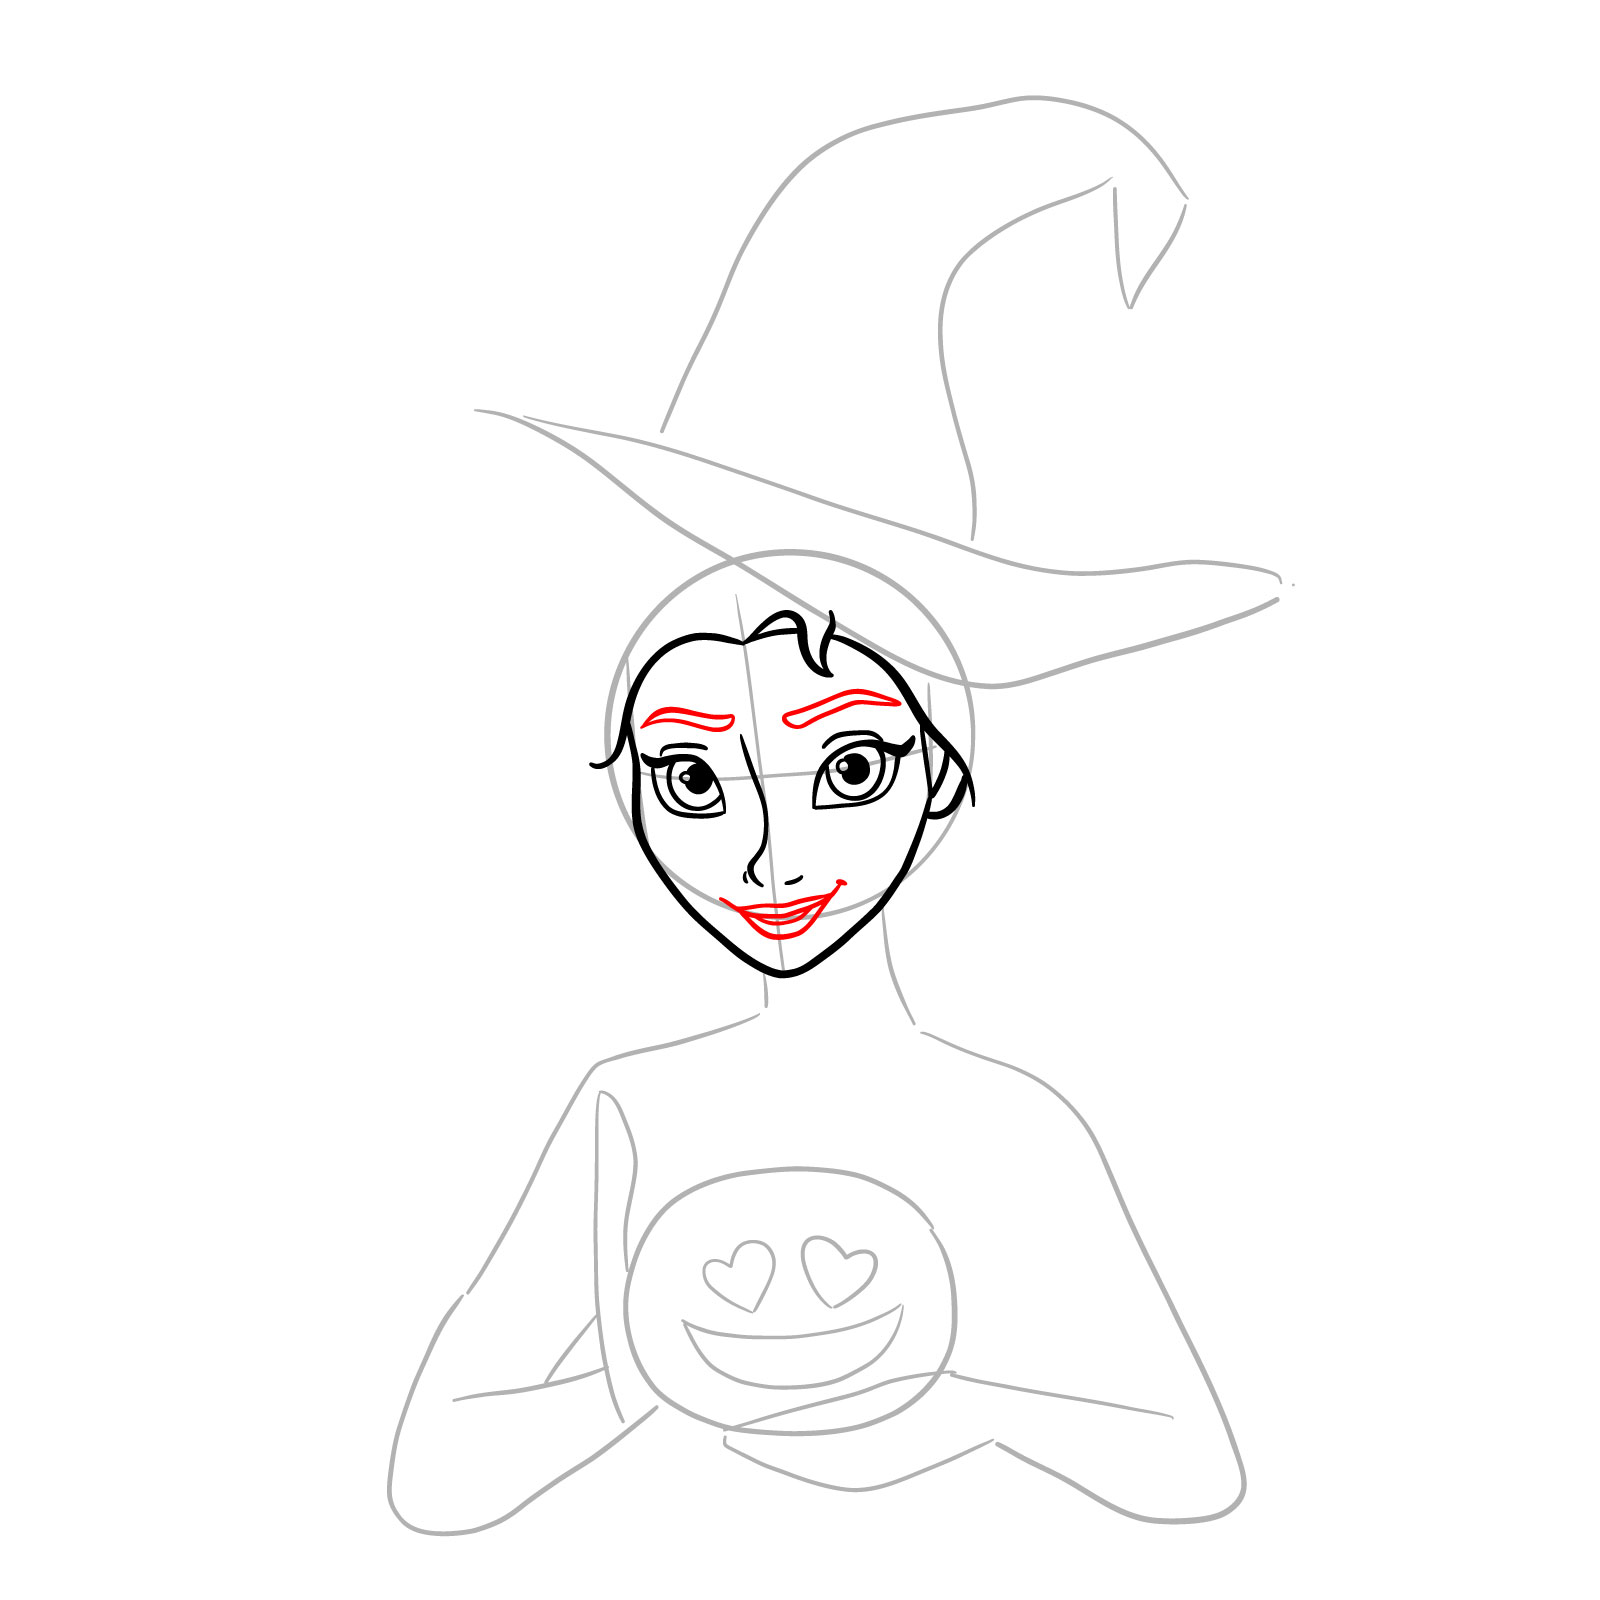 How to Draw Witch Elsa on Halloween - step 10